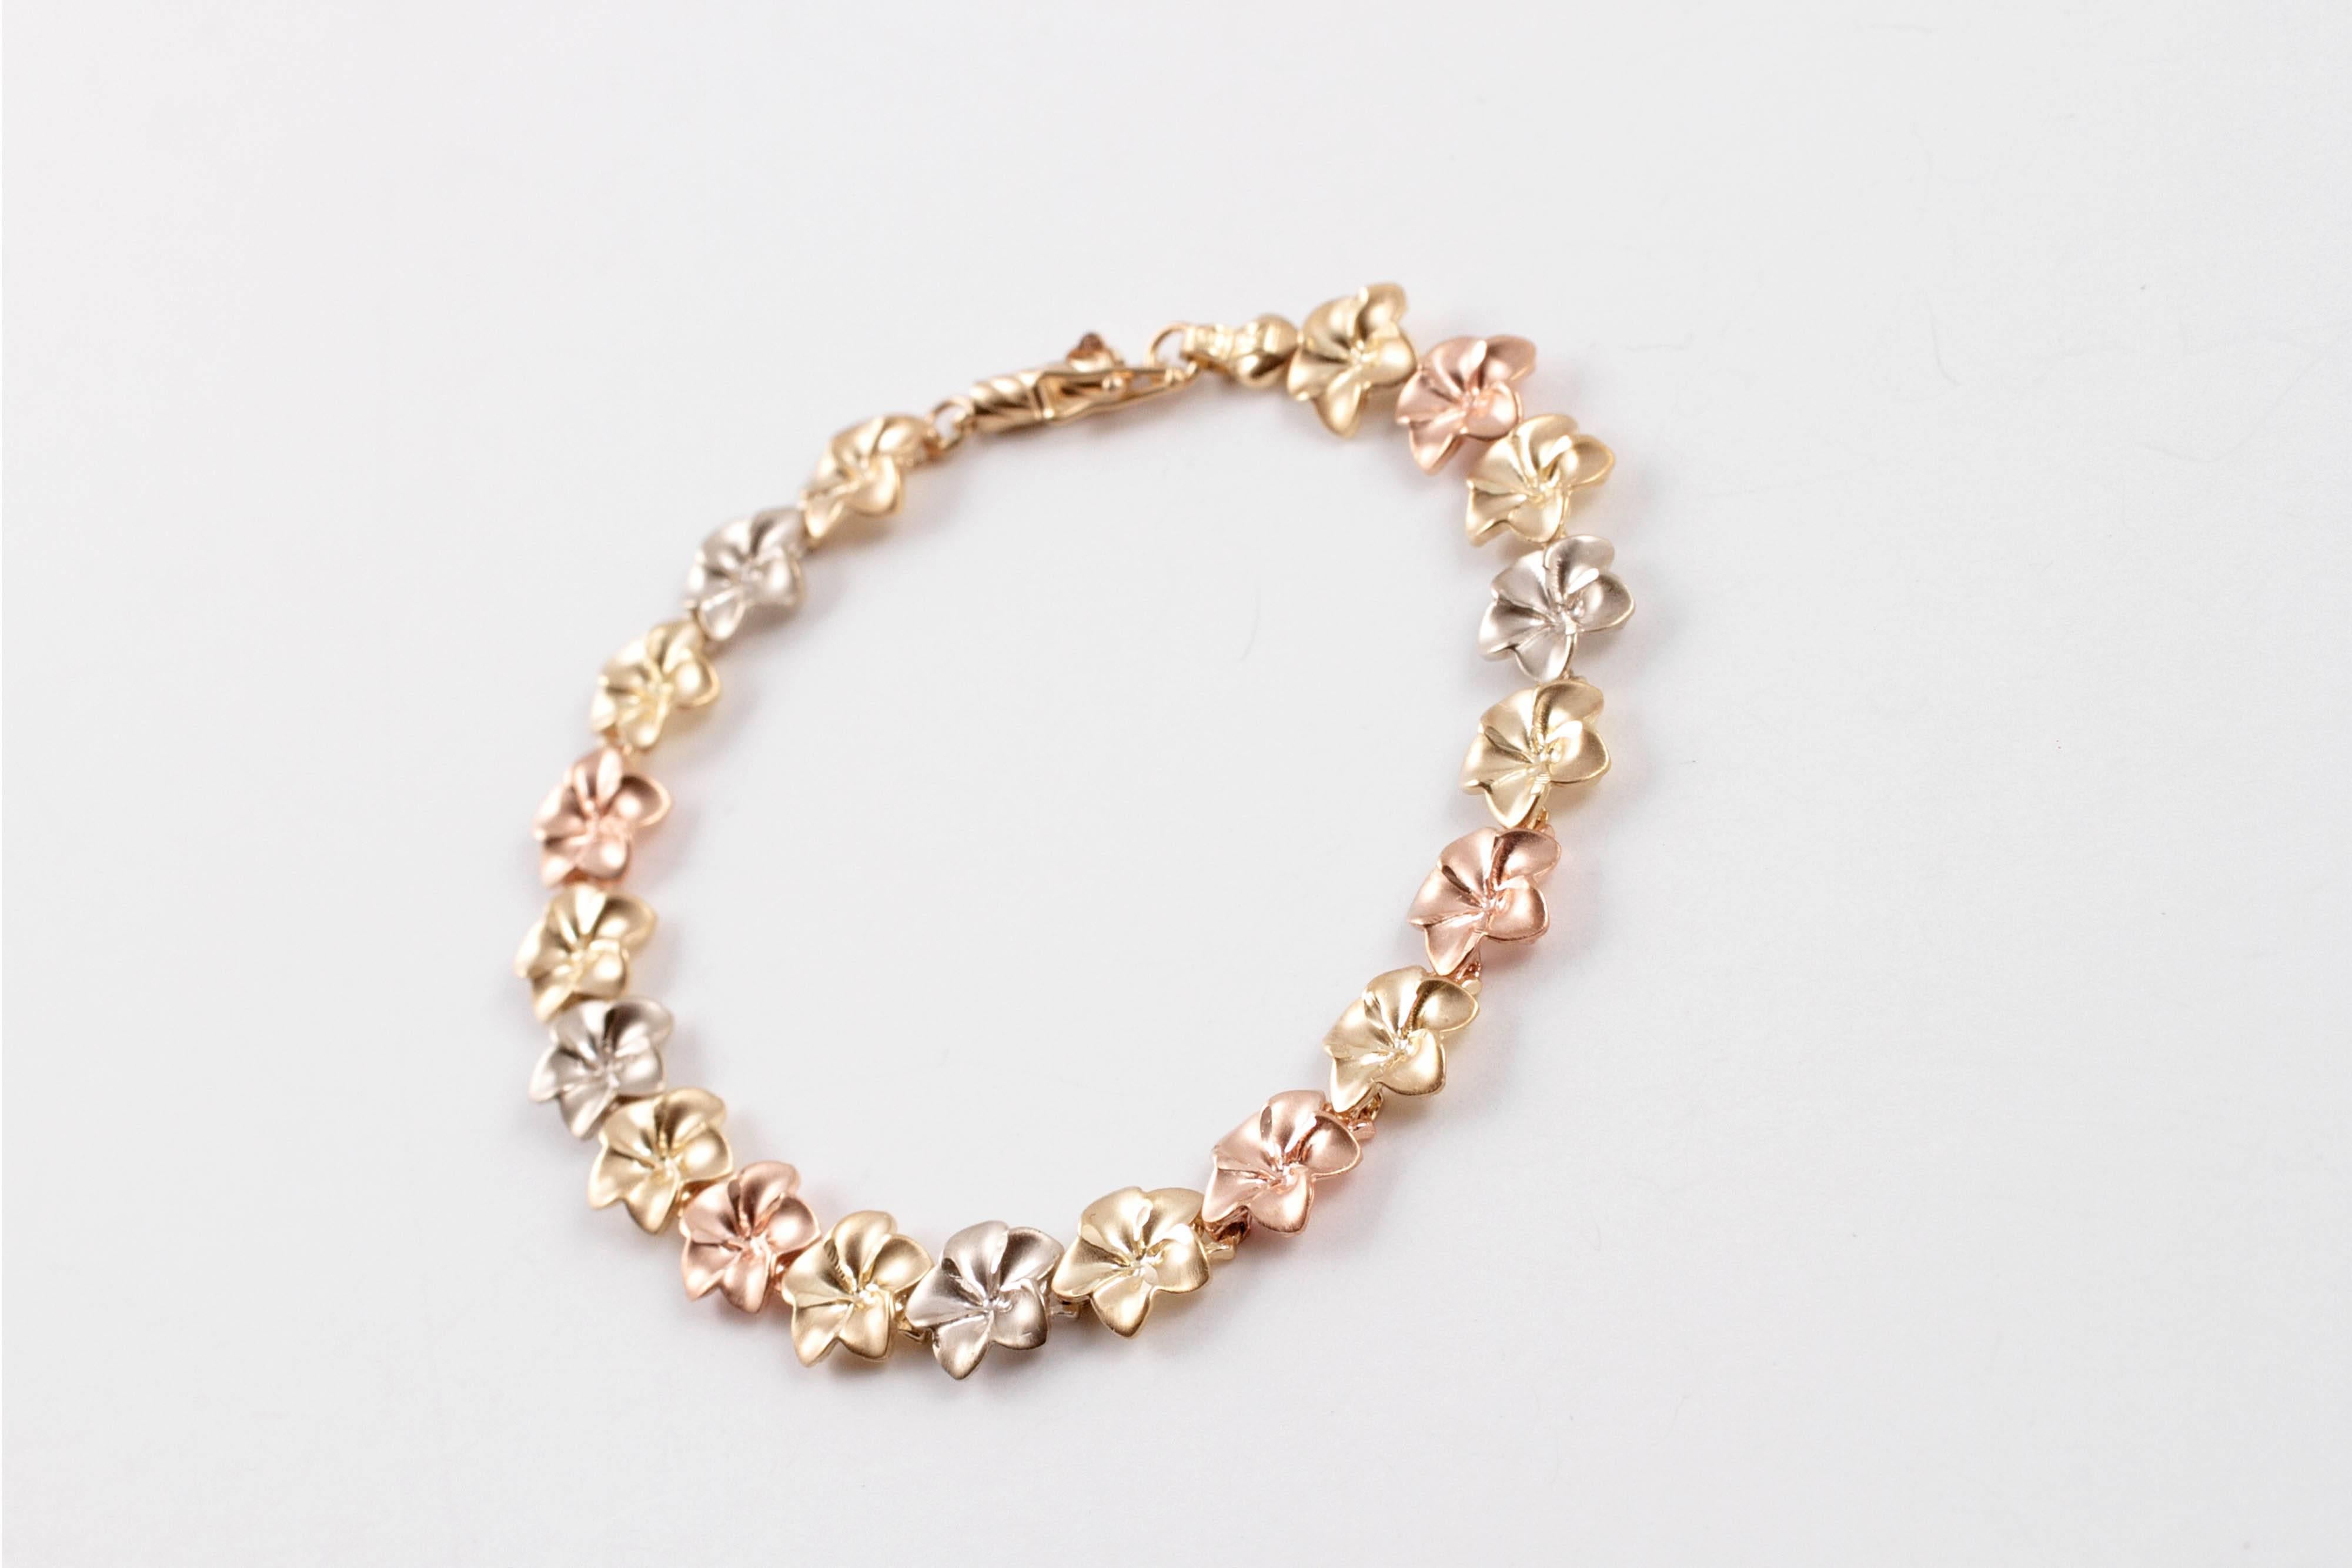 This sweet tri-color bracelet measures 7 inch in length and supports nineteen delightful yellow, white, and rose gold flowers.  All in 14 karat.